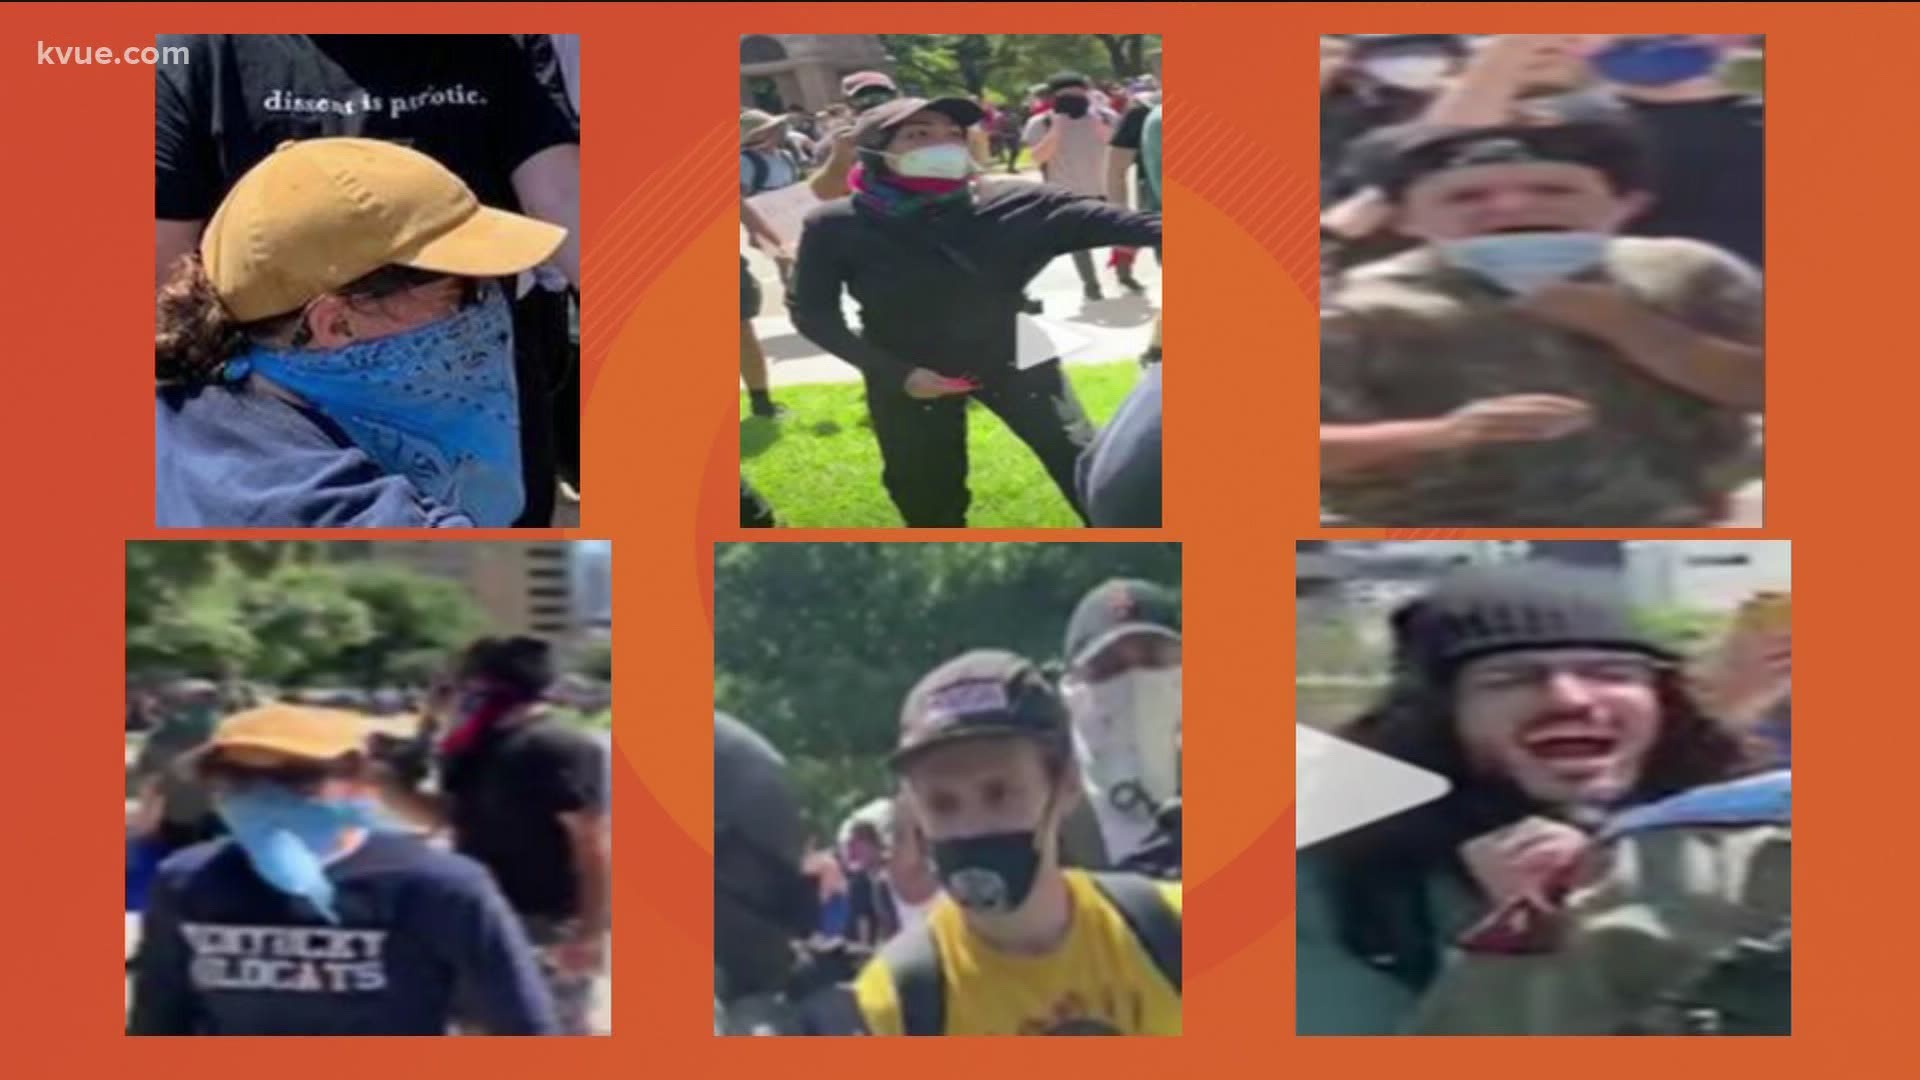 Texas DPS is asking for help finding six people who are believed to have been part of violence that occurred outside the Capitol during the Austin protests.